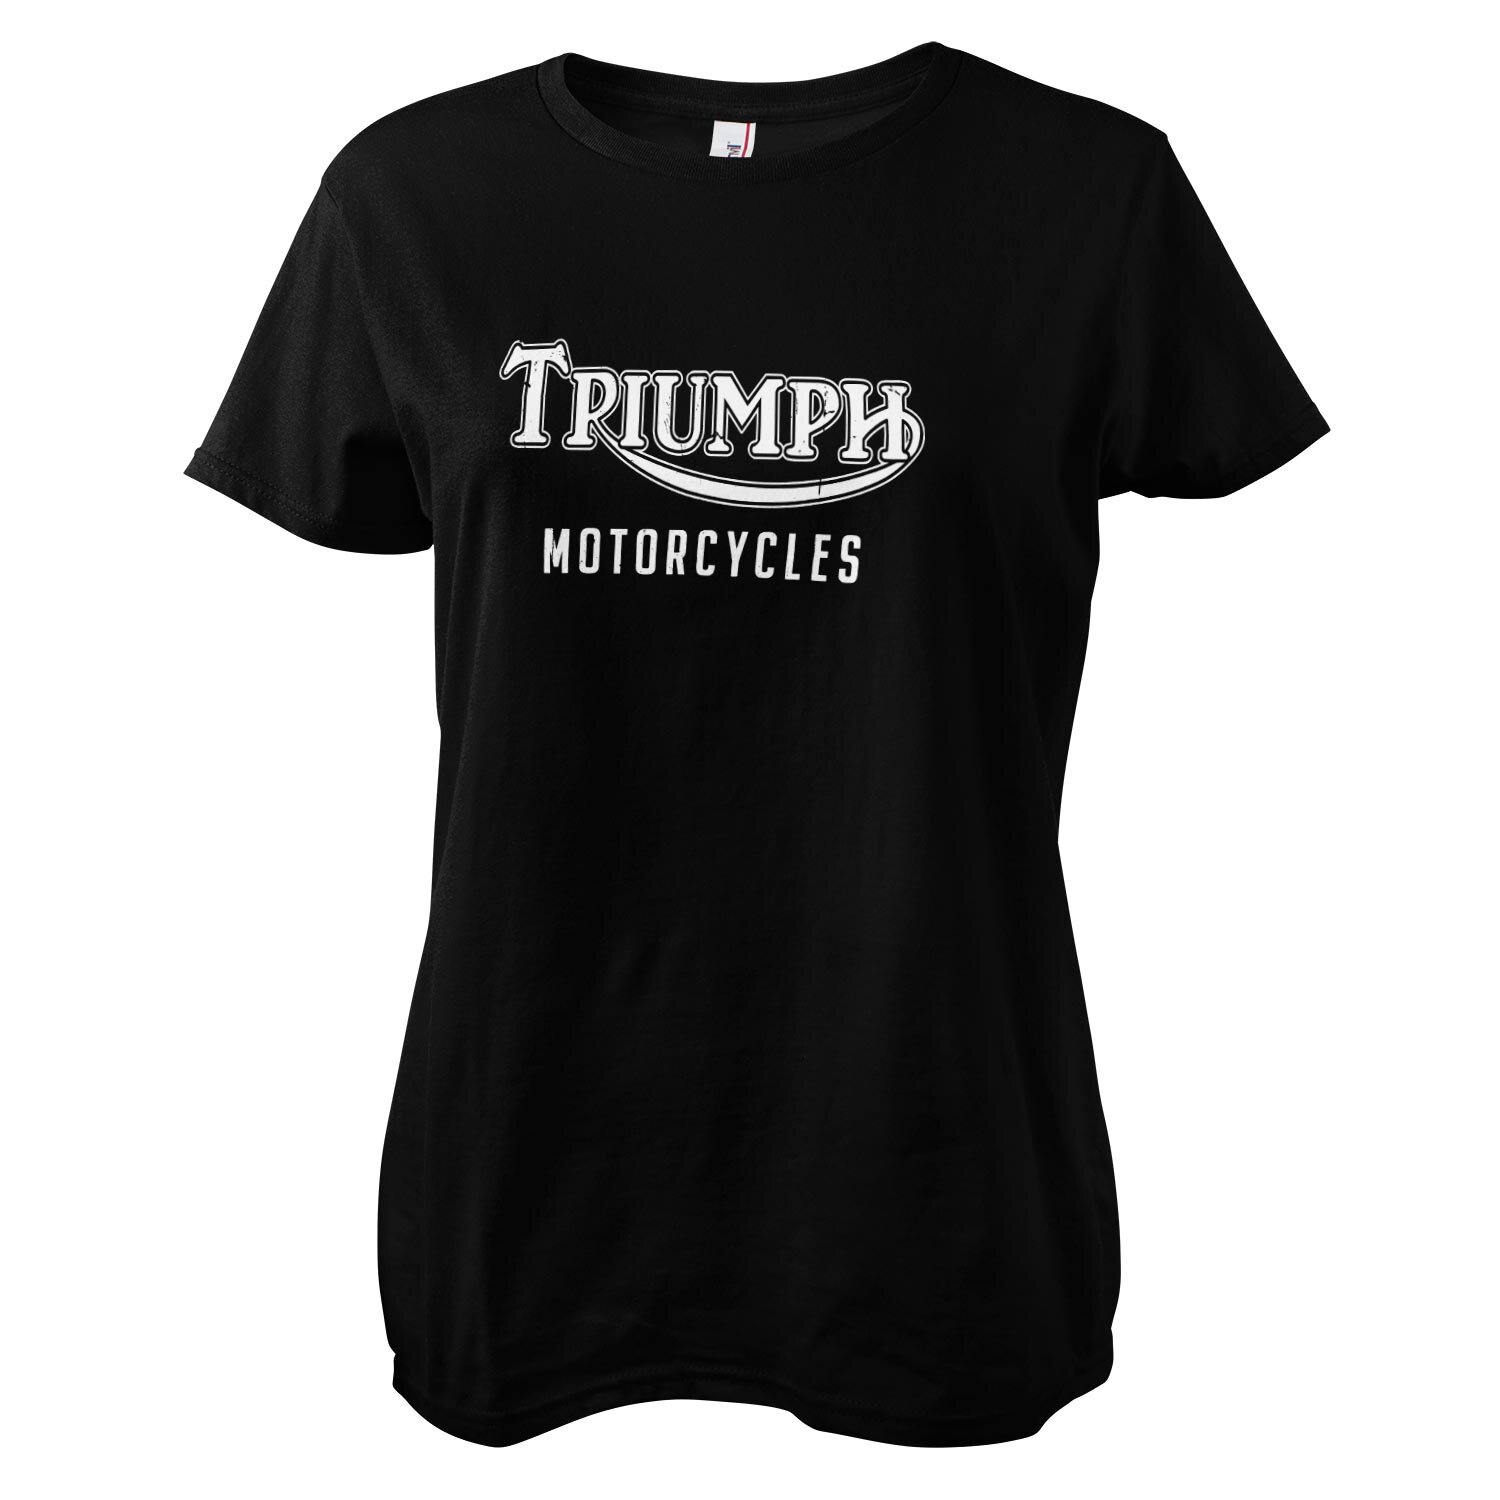 Triumph Motorcycles Girly Tee